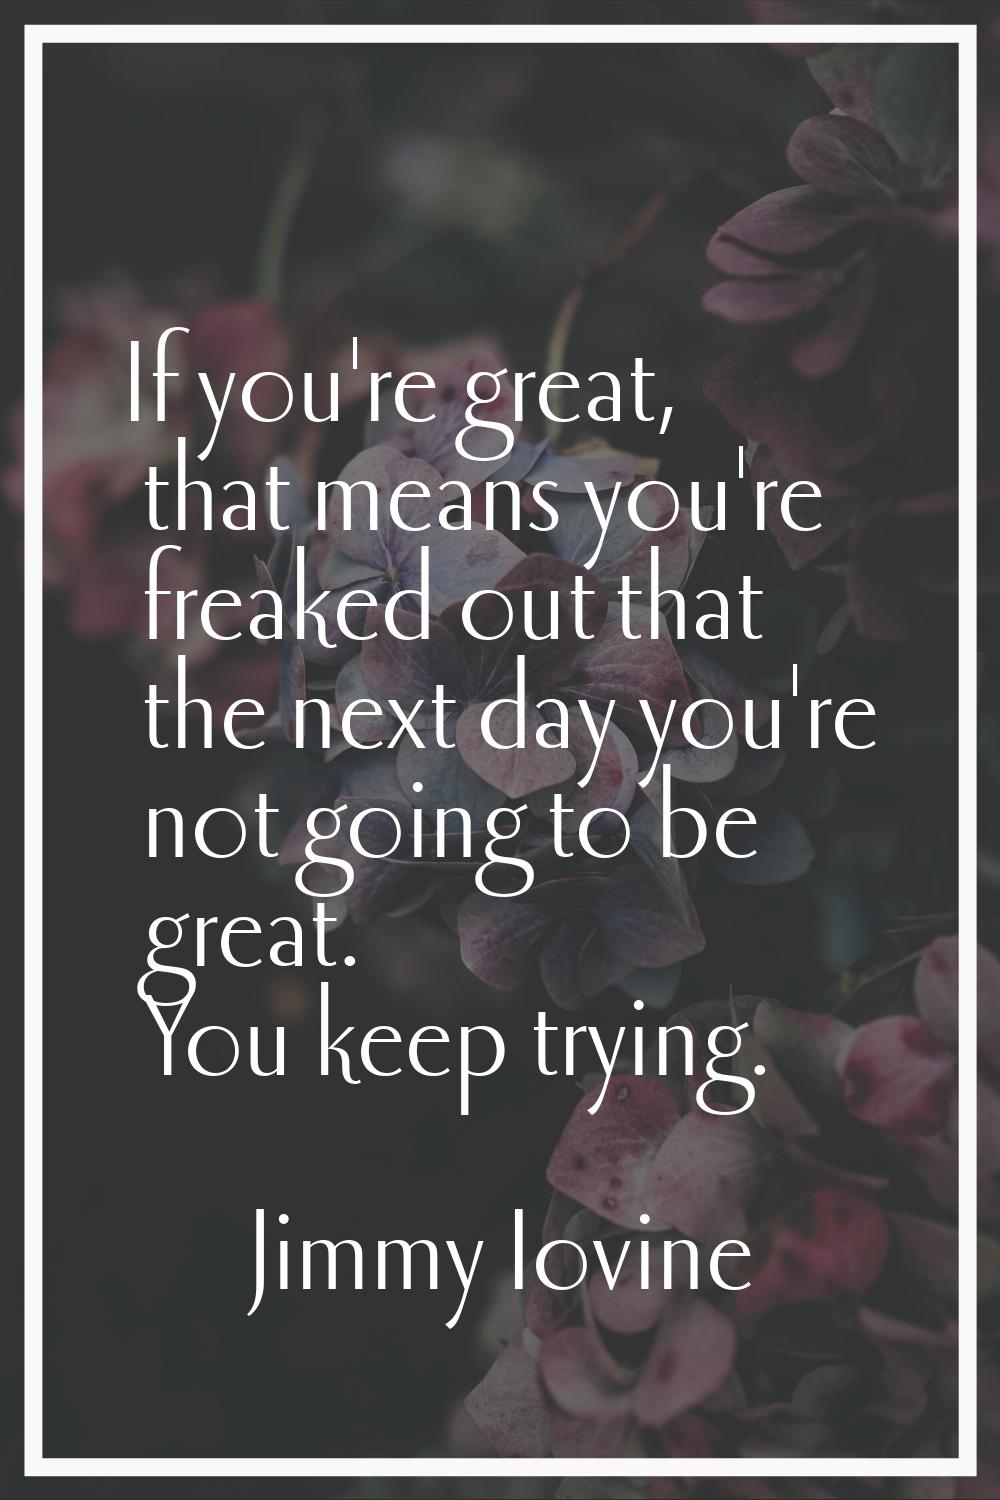 If you're great, that means you're freaked out that the next day you're not going to be great. You 